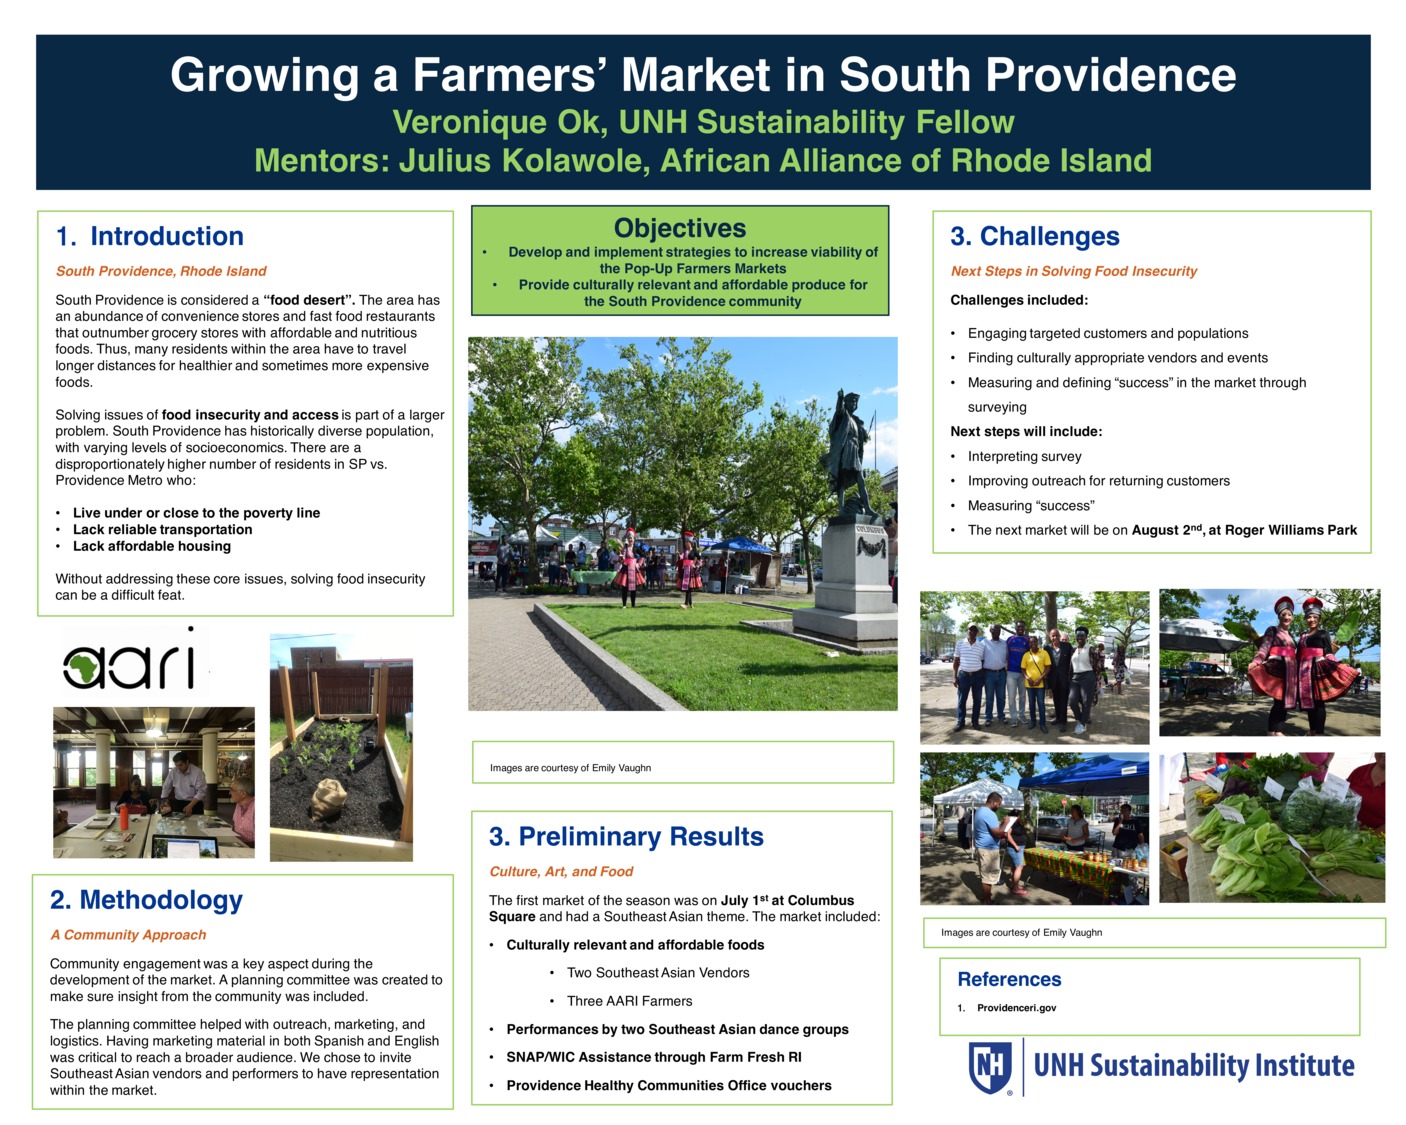 Growing A Farmers' Market In South Providence by vo1002